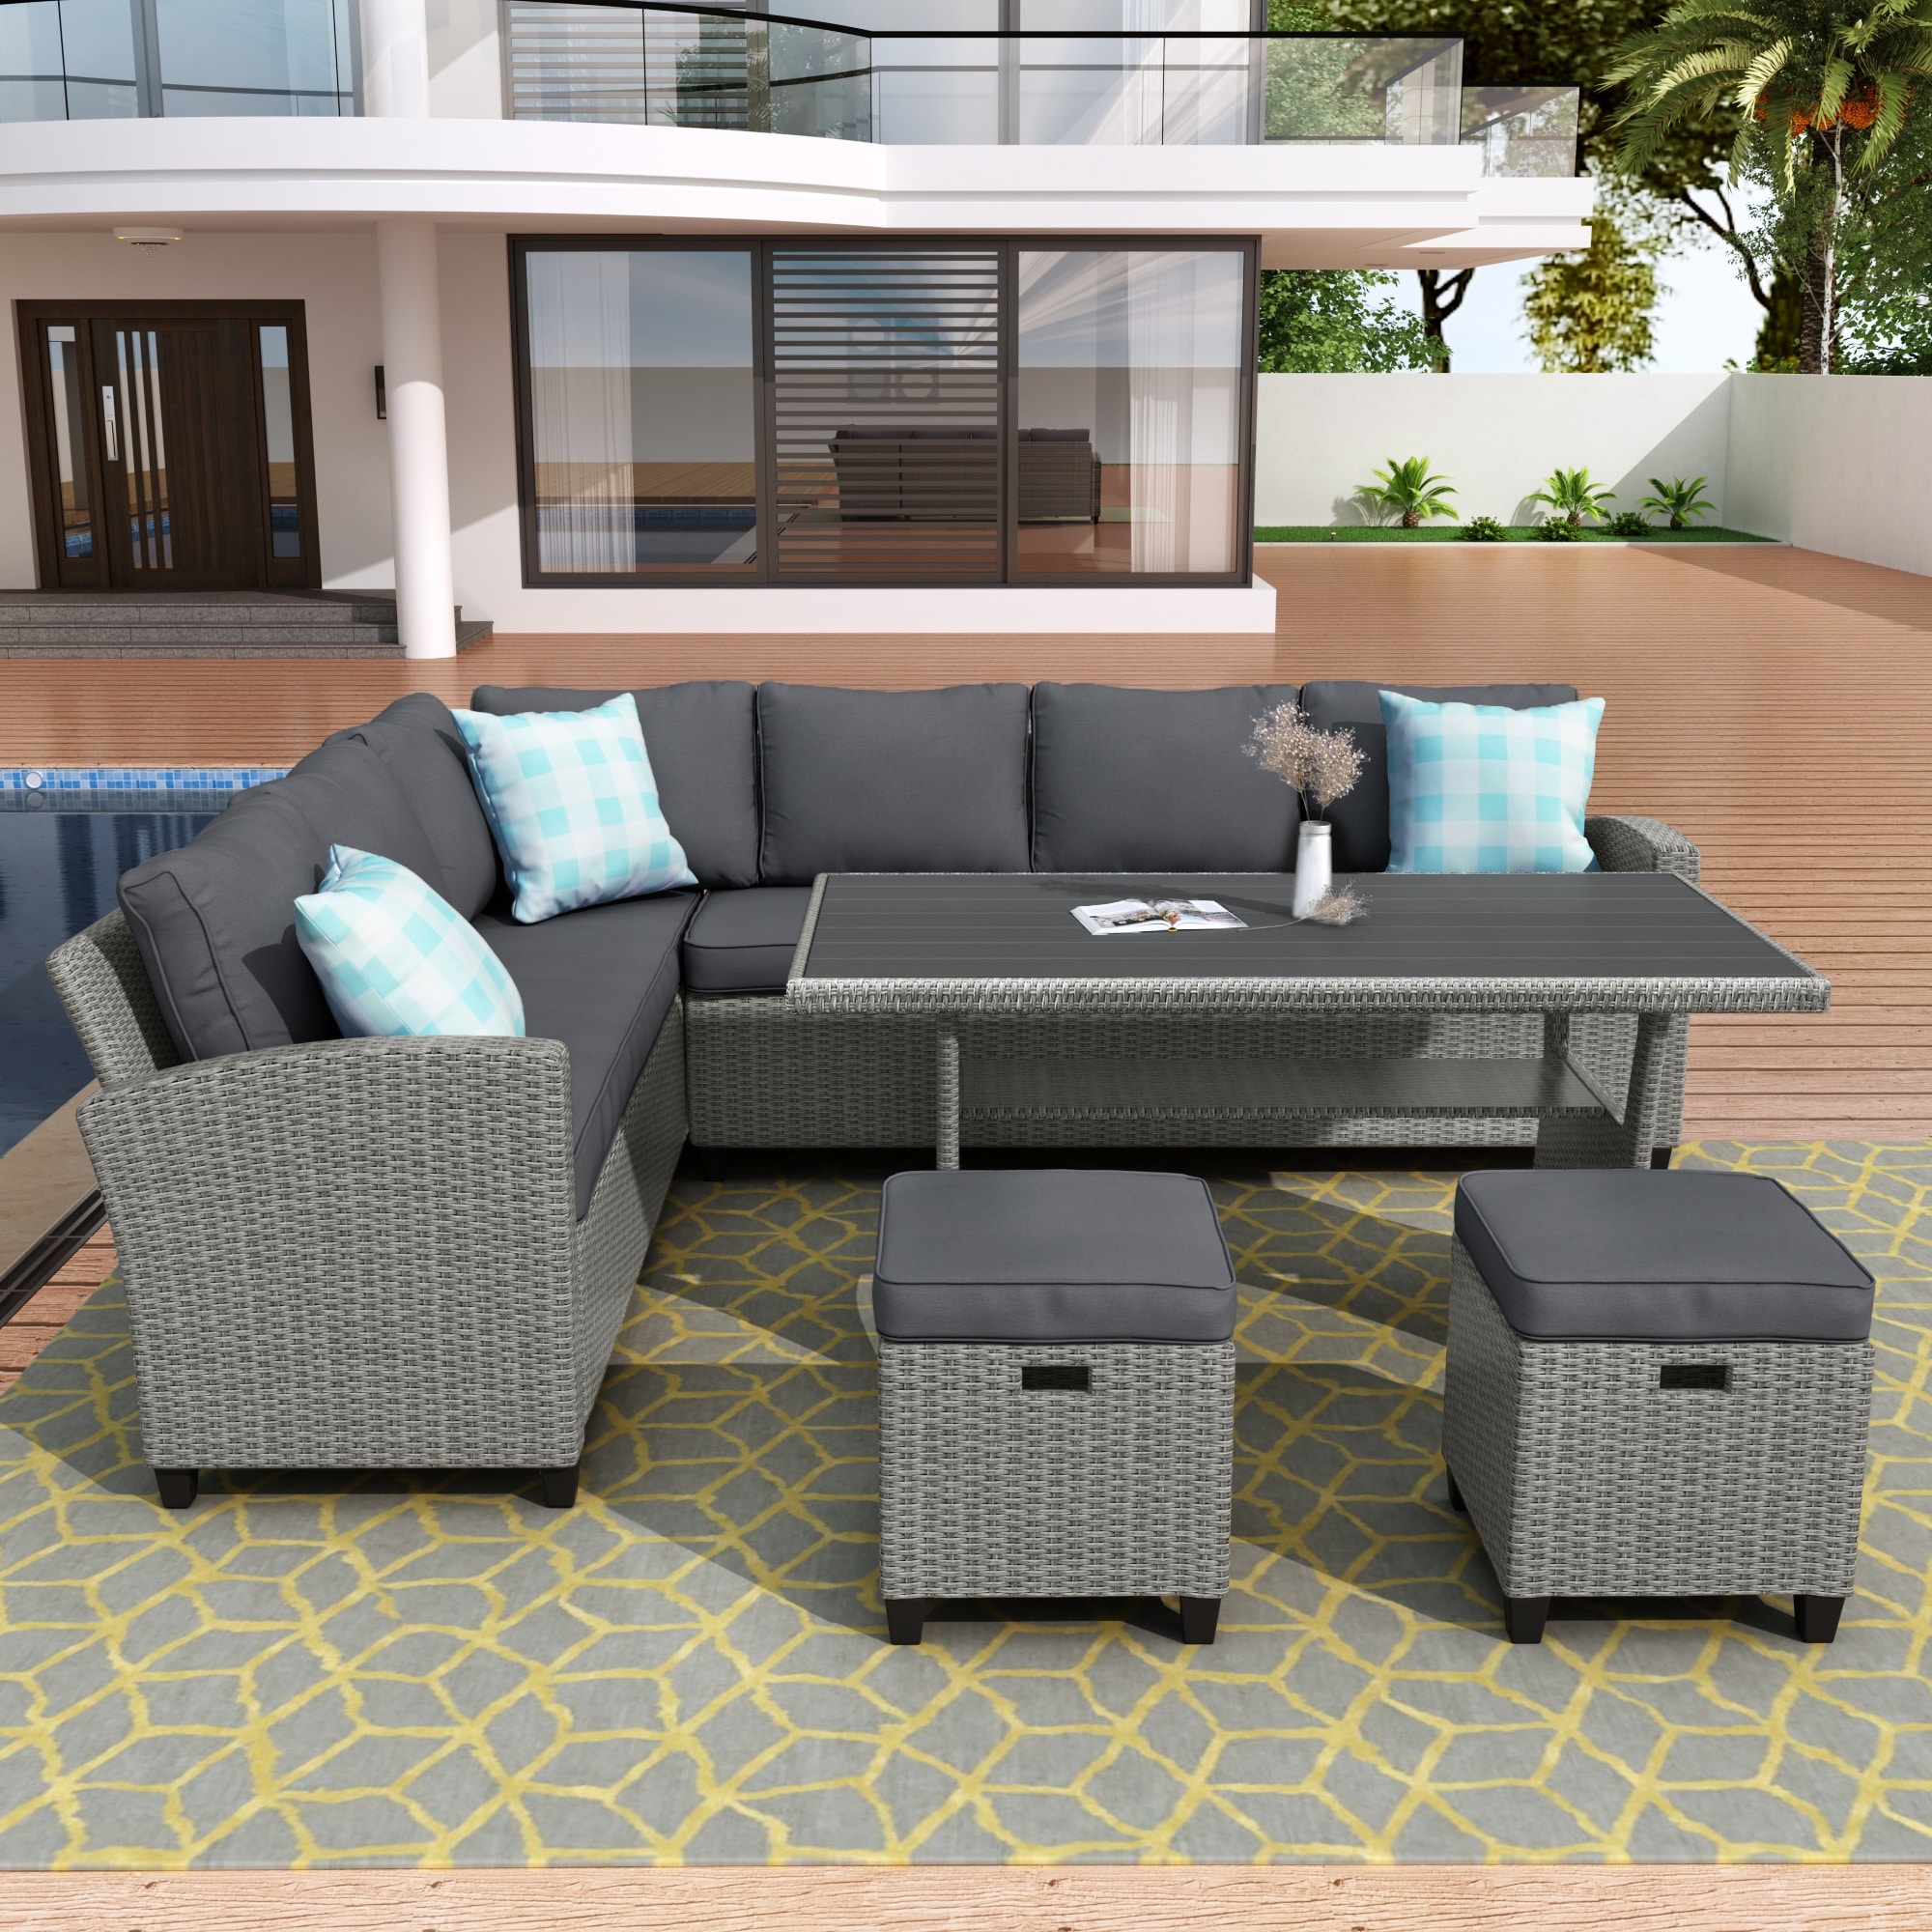 5 Piece Patio Furniture Set  Weatherproof Resin Wicker With Steel Frame  Thickened Cushioning And Lumbar Support